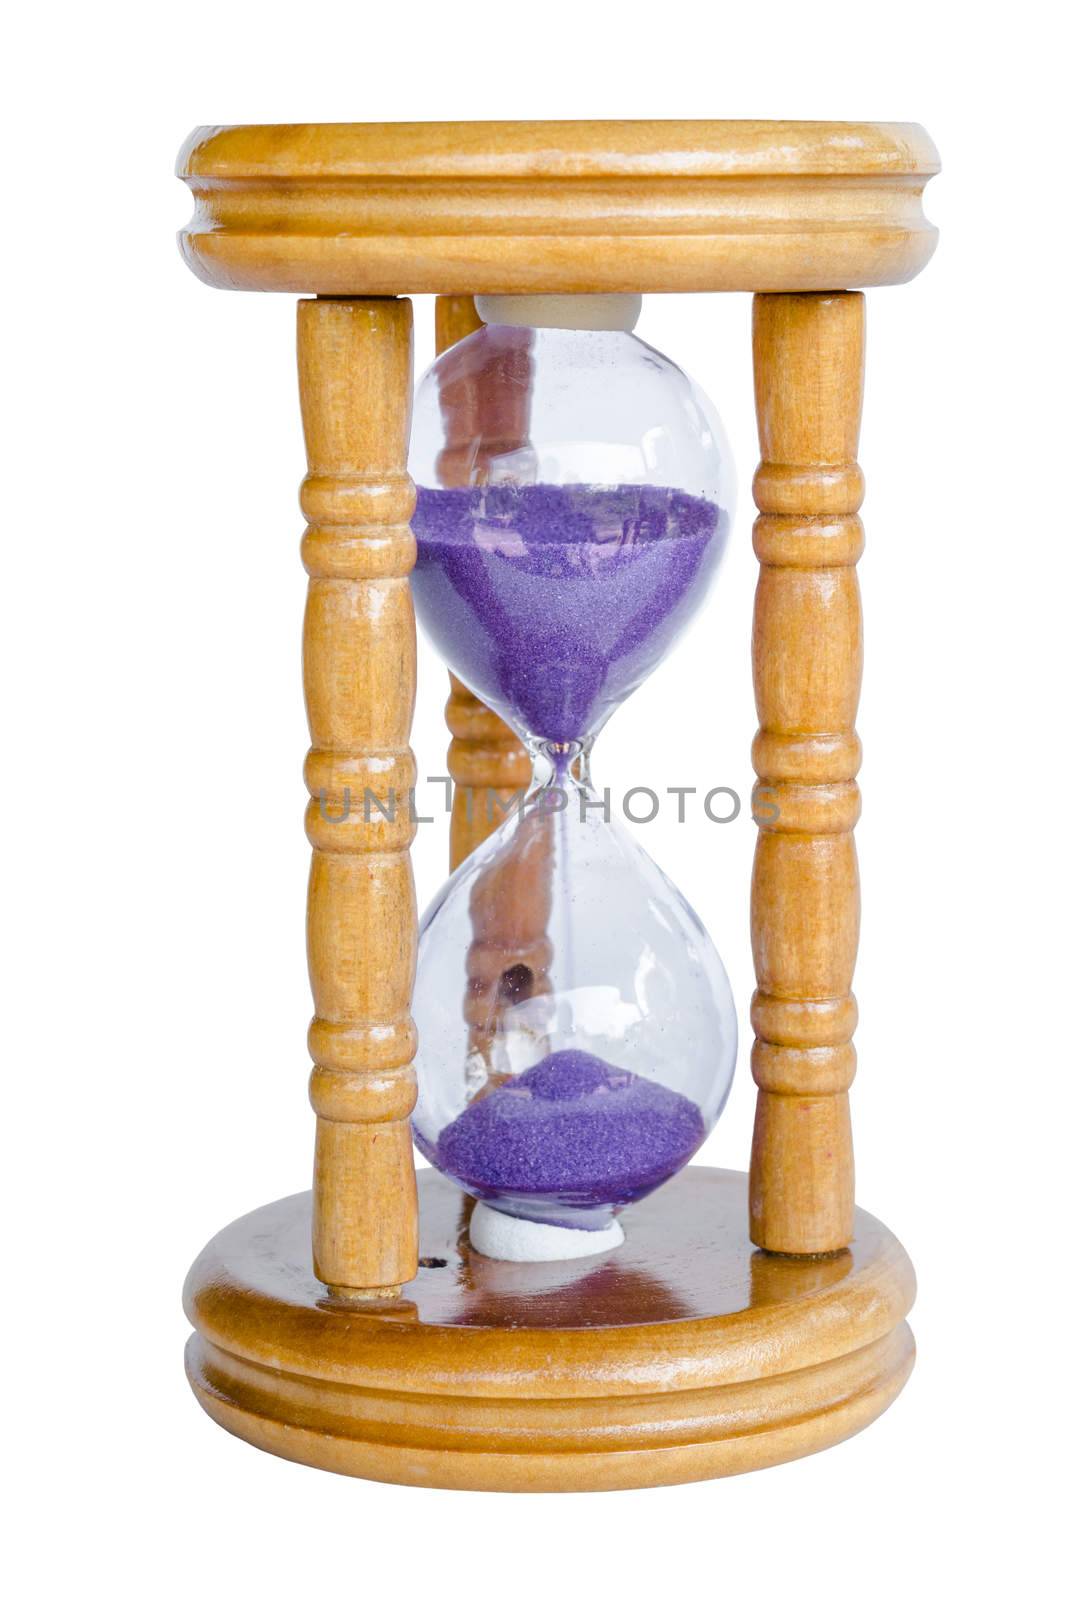 Wood hour-glass with violet sand. by Gamjai